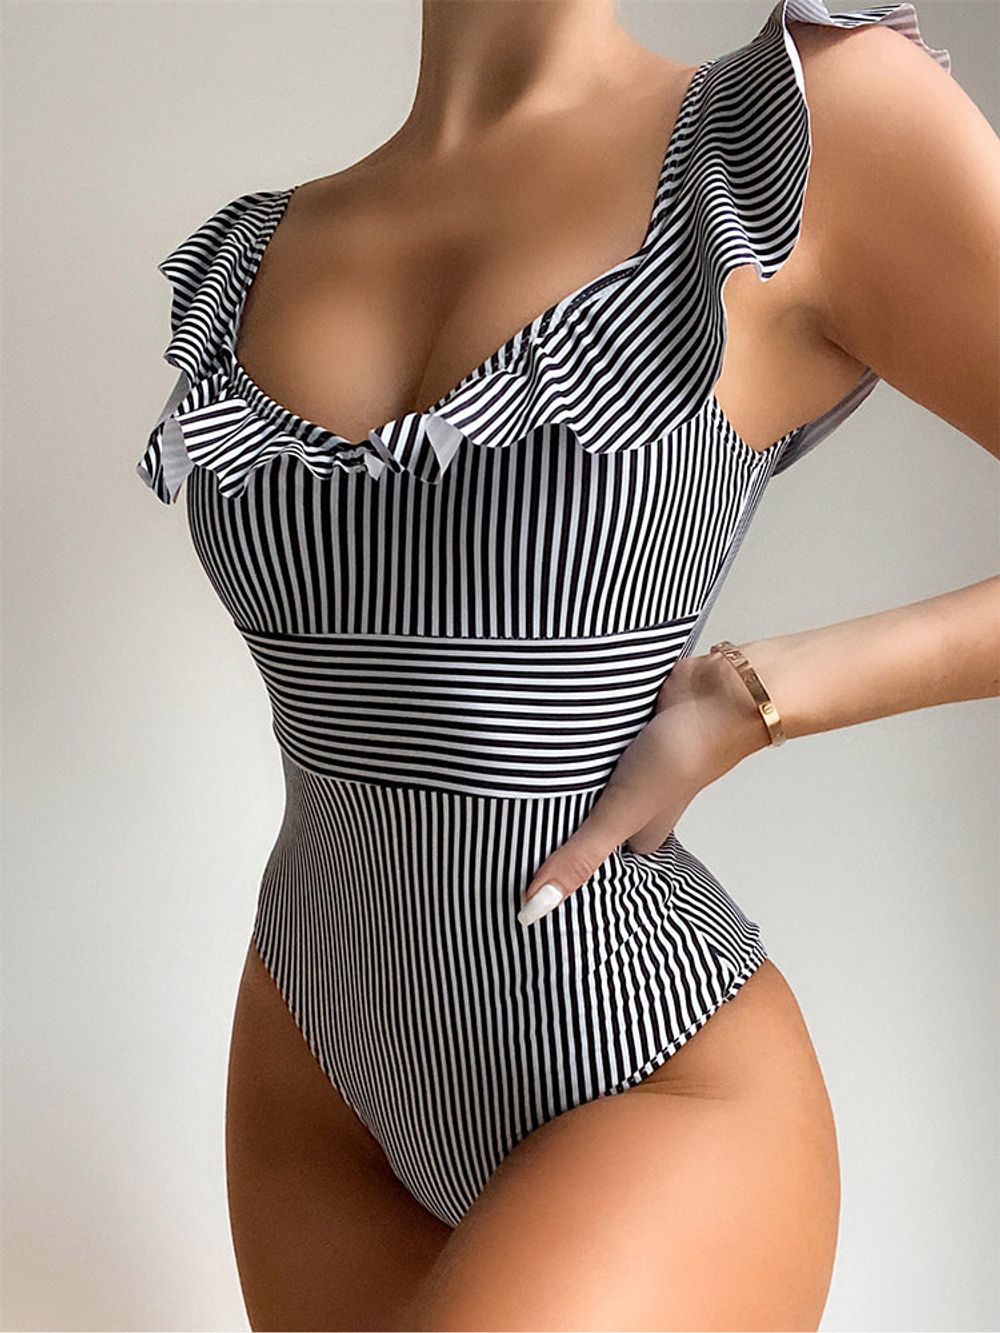 Ruffle Vintage Striped One Piece Swimsuit